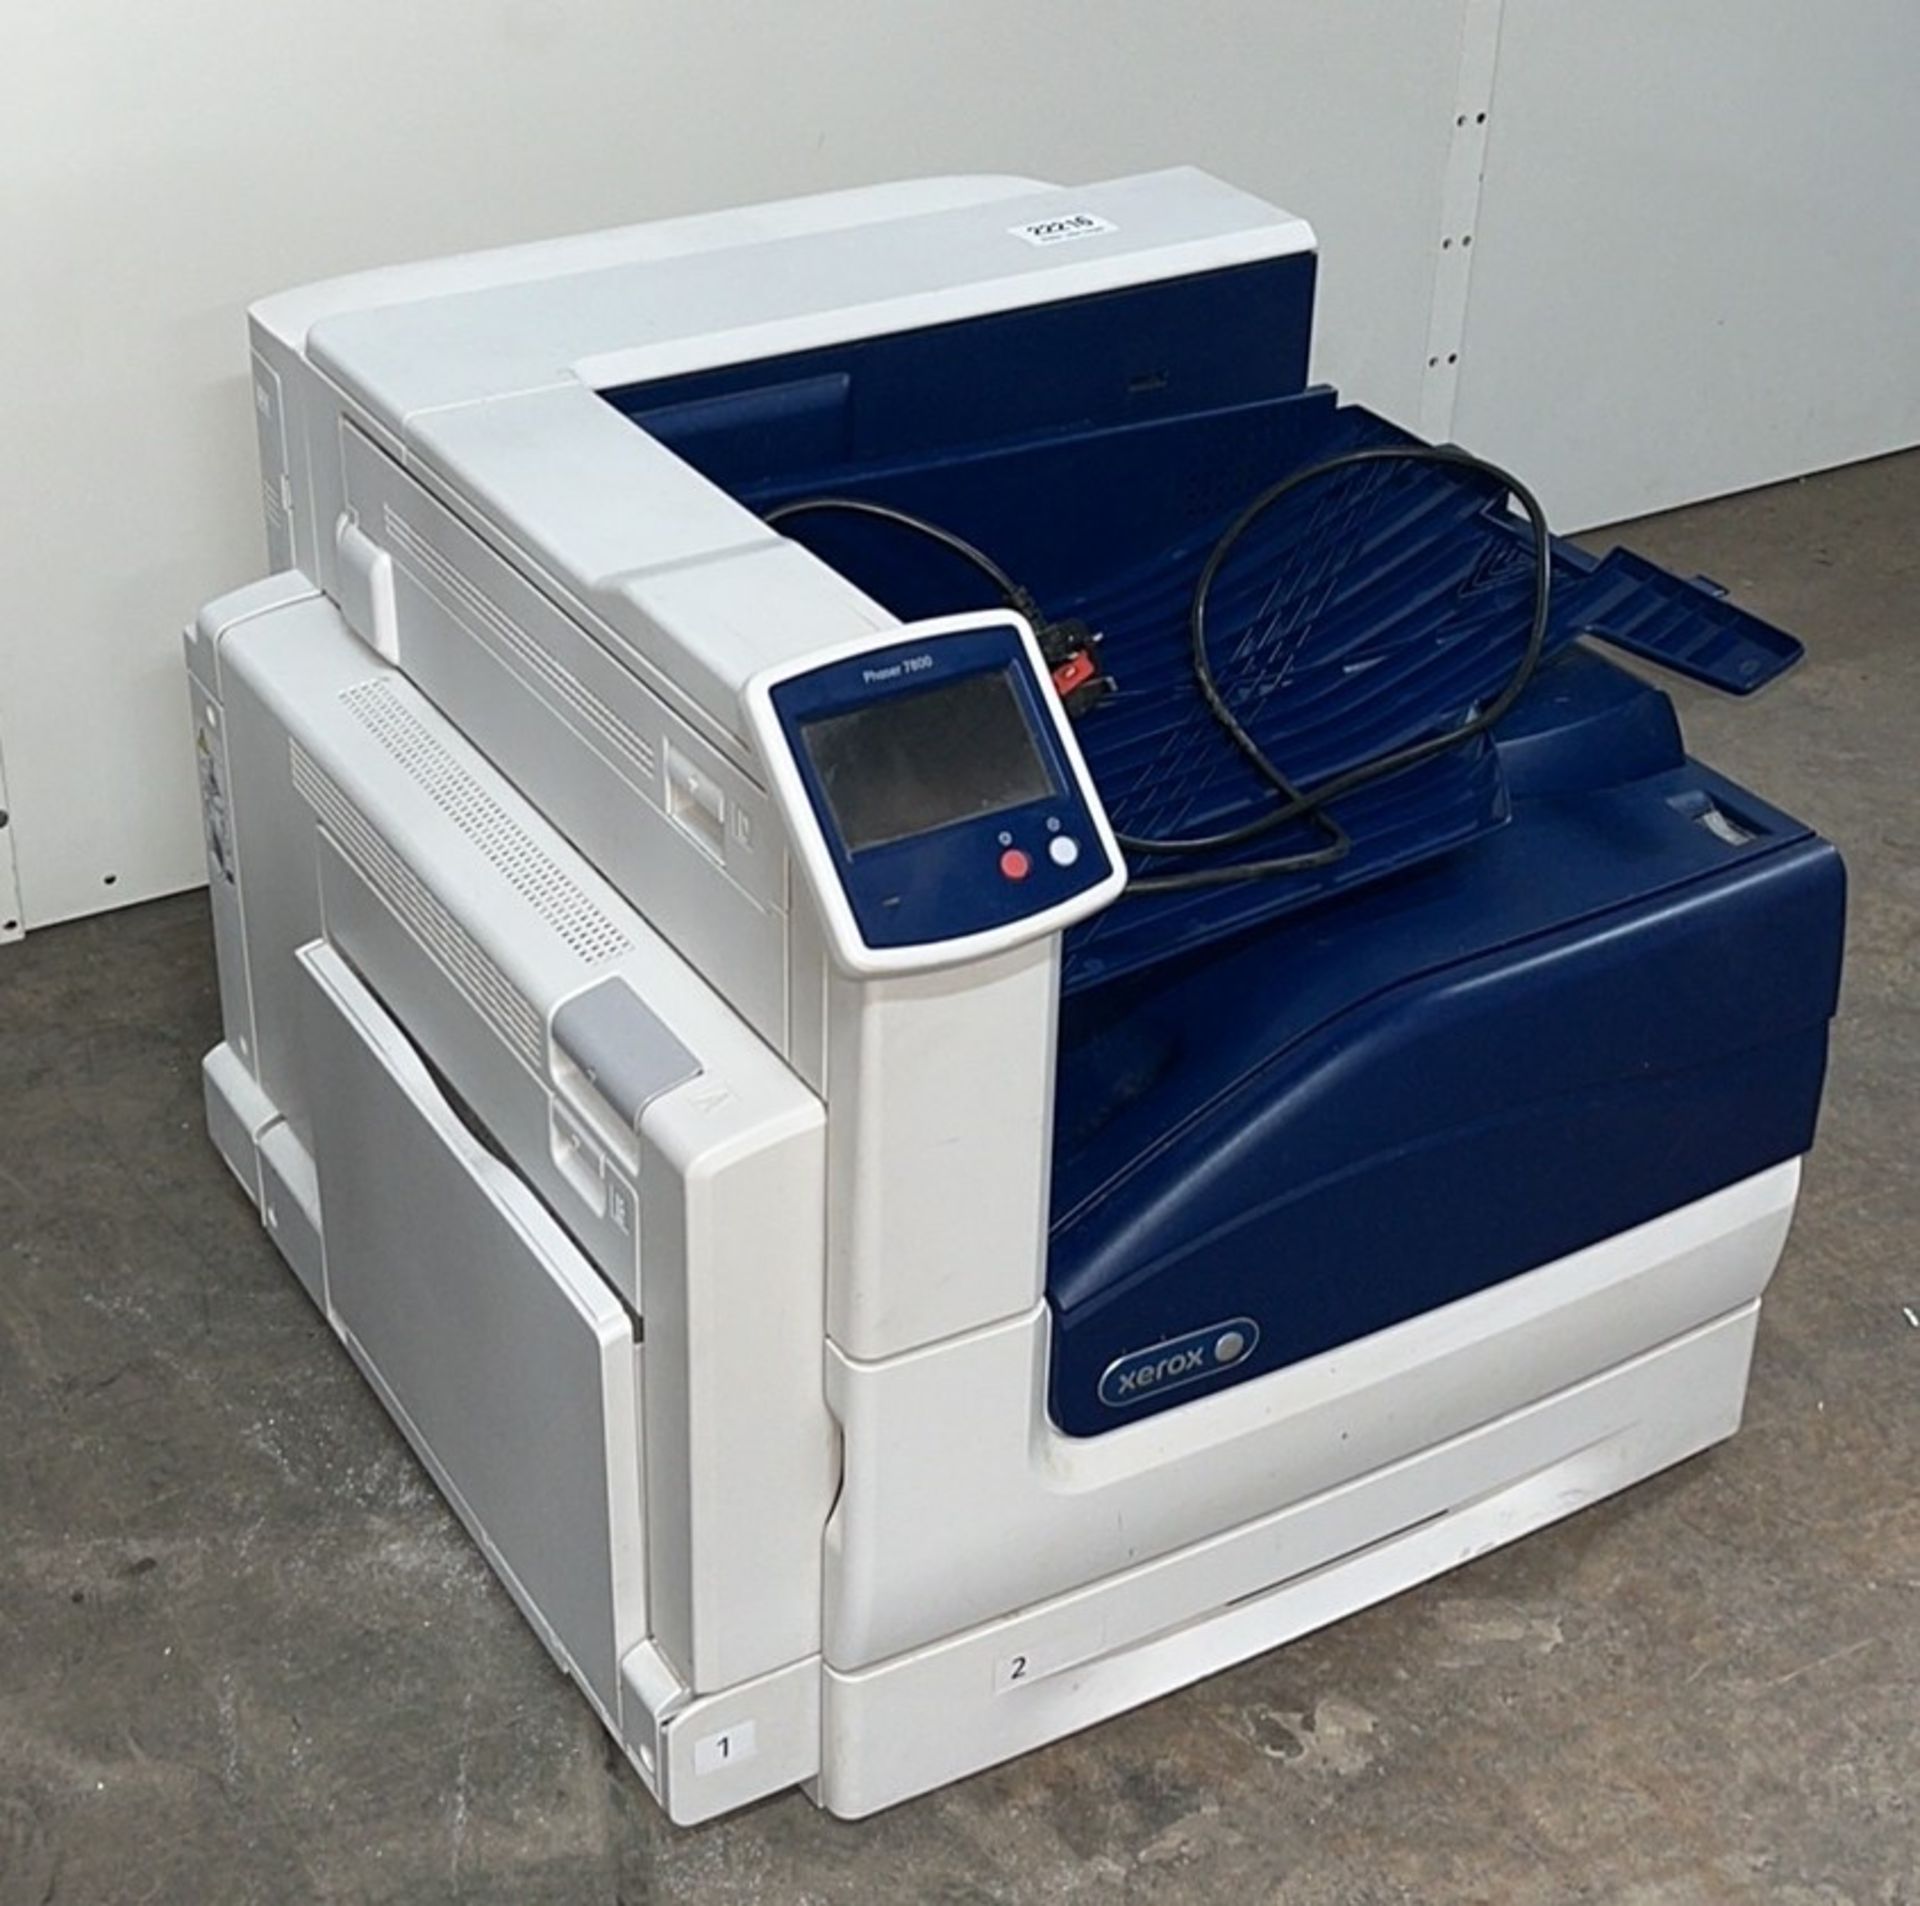 Xerox Phaser 7800 Colour Printer - Image 6 of 7